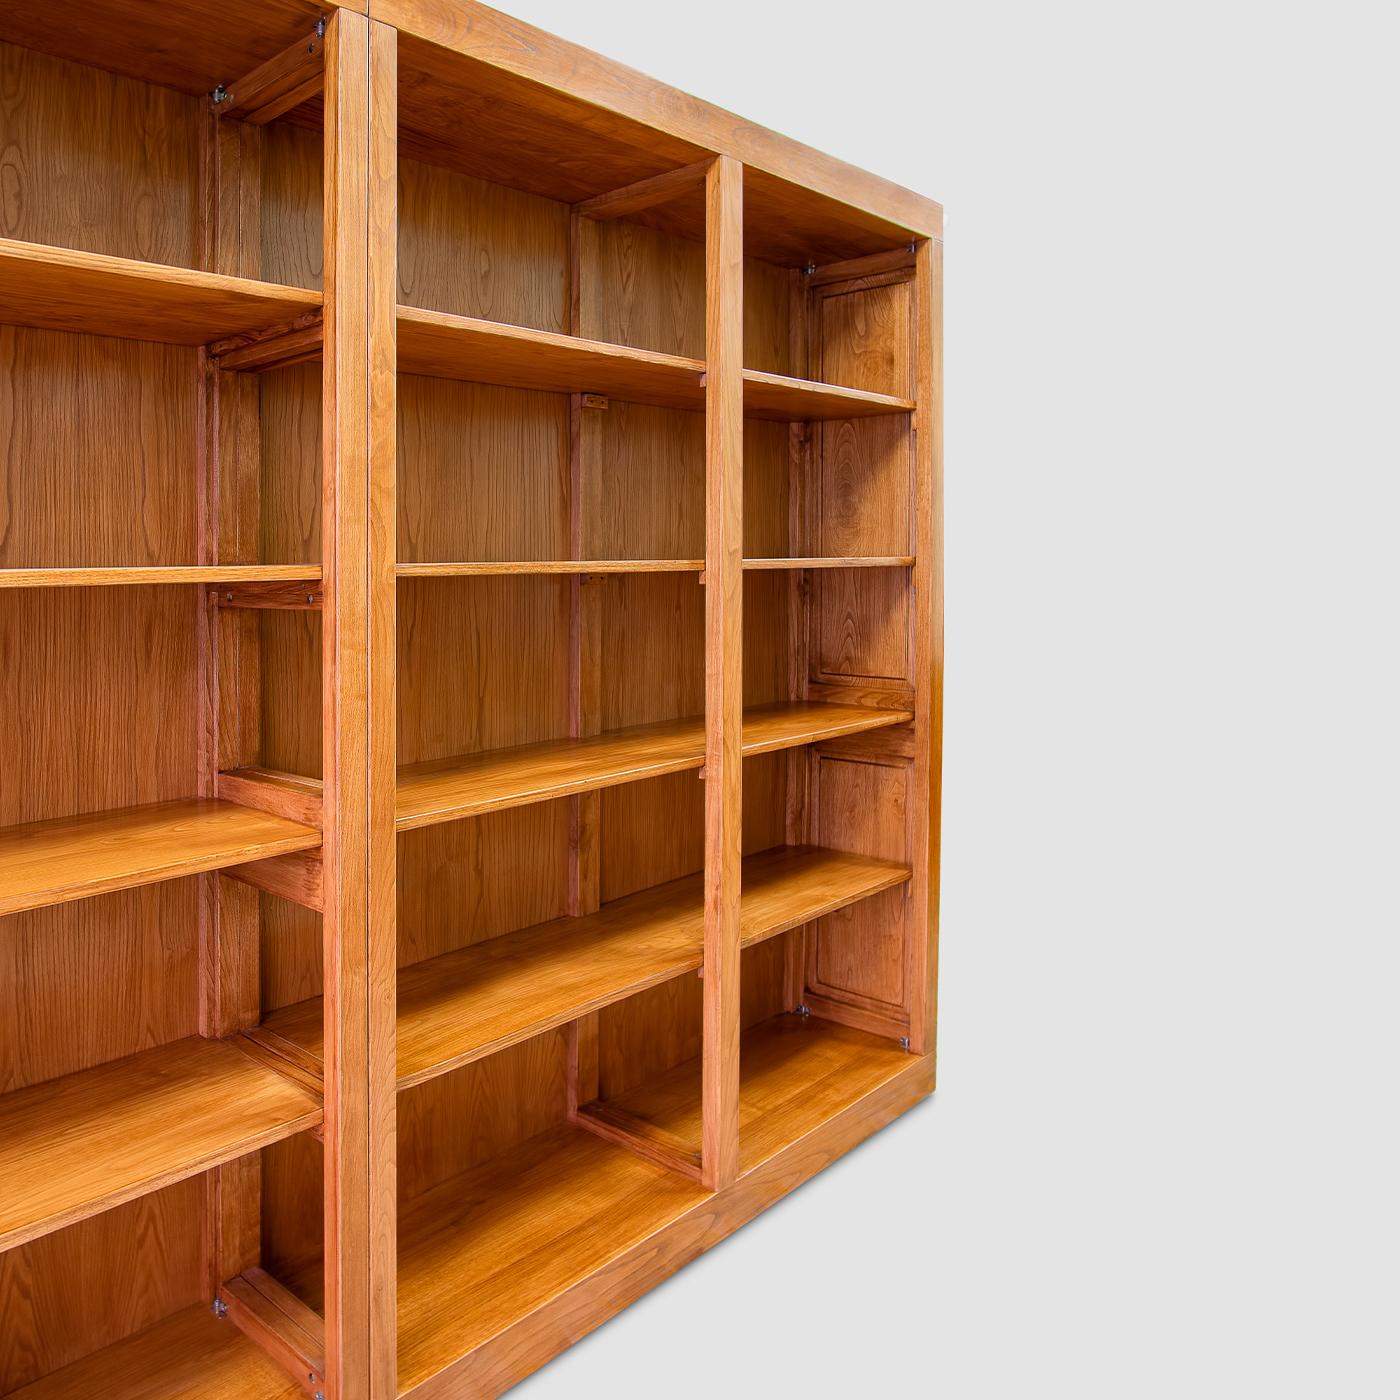 This meticulously handcrafted modern bookcase showcases the warmth of solid chestnut wood grain, here offered in a nontoxic, walnut stain variant enhanced with beeswax. Concealed leveling feet ensure excellent support for the two shelving units,